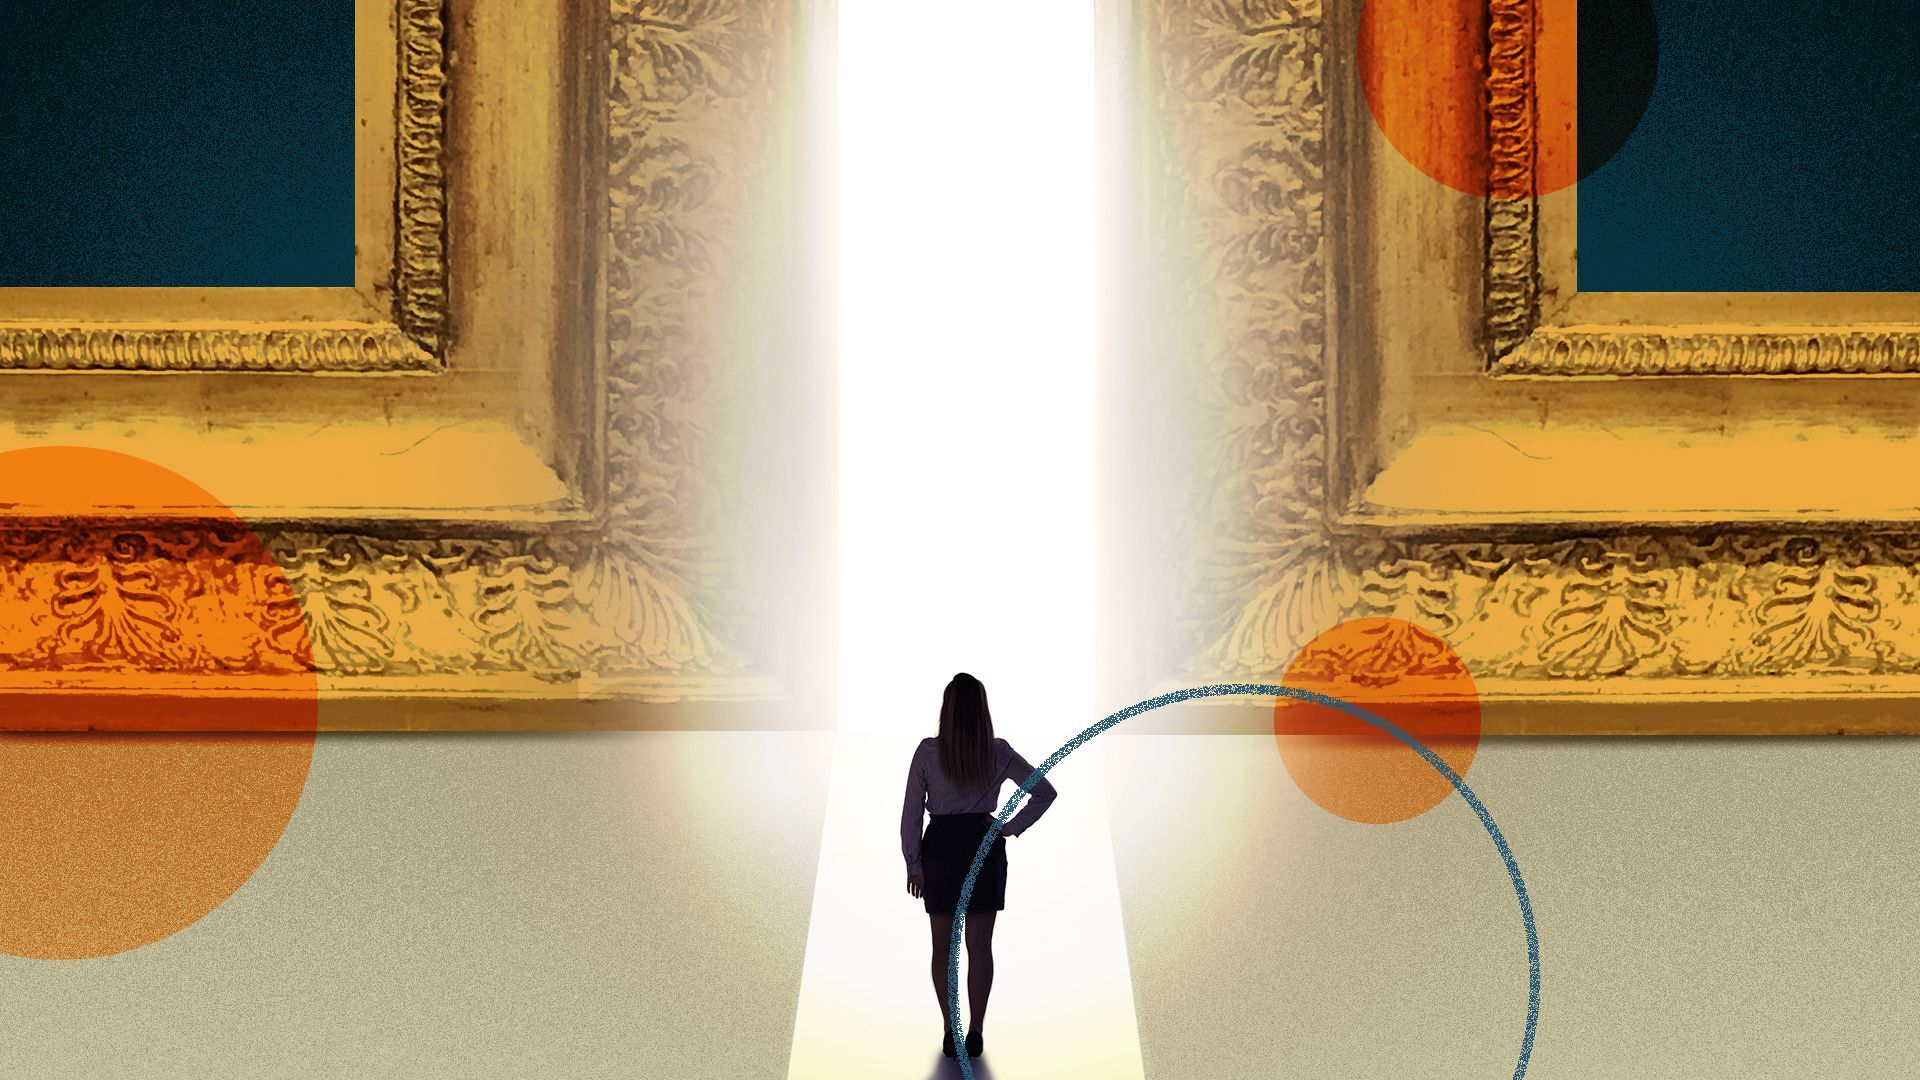 Illustration of a person looking into a narrow light formed by two giant painting frames.